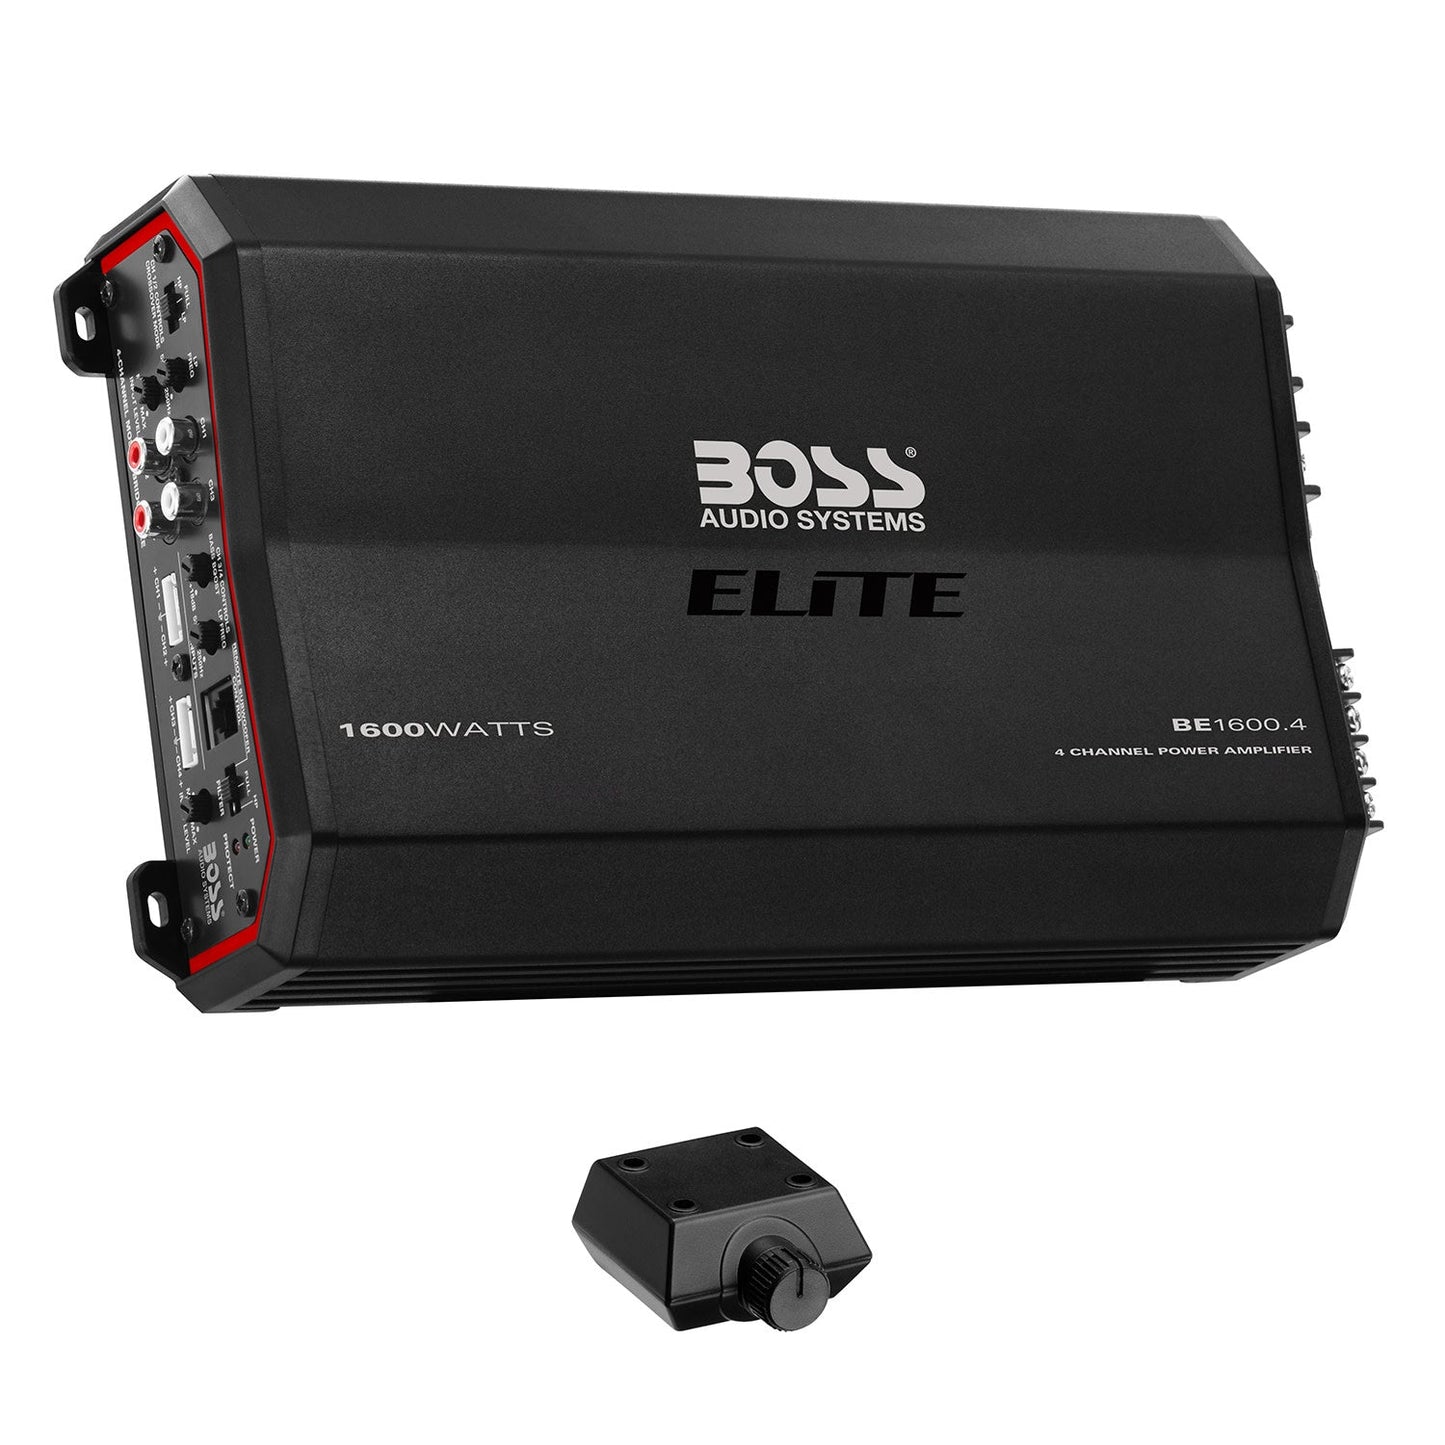 BOSS Audio Systems, Amplifiers > 4-Channel, Model BE1600.4, additional product image